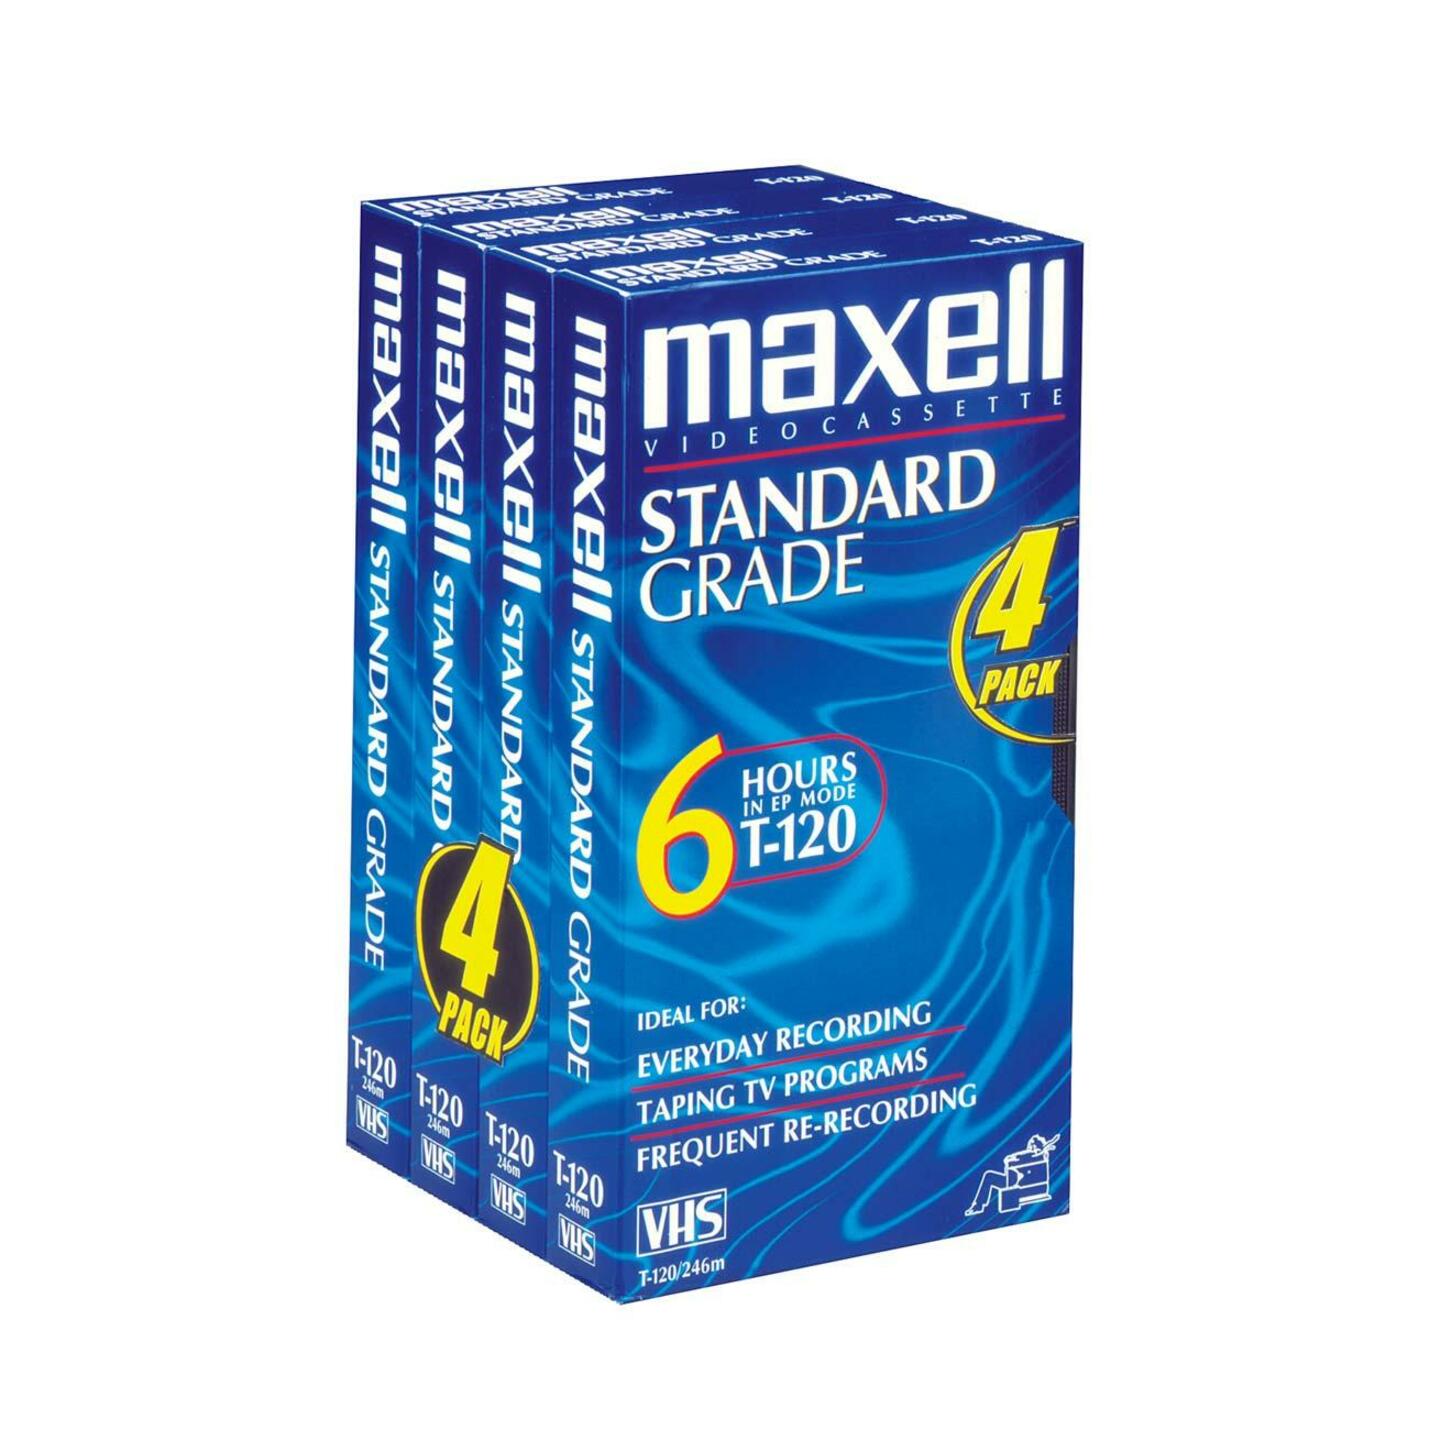 Maxell Standard VHS Videocassette - image 1 of 4